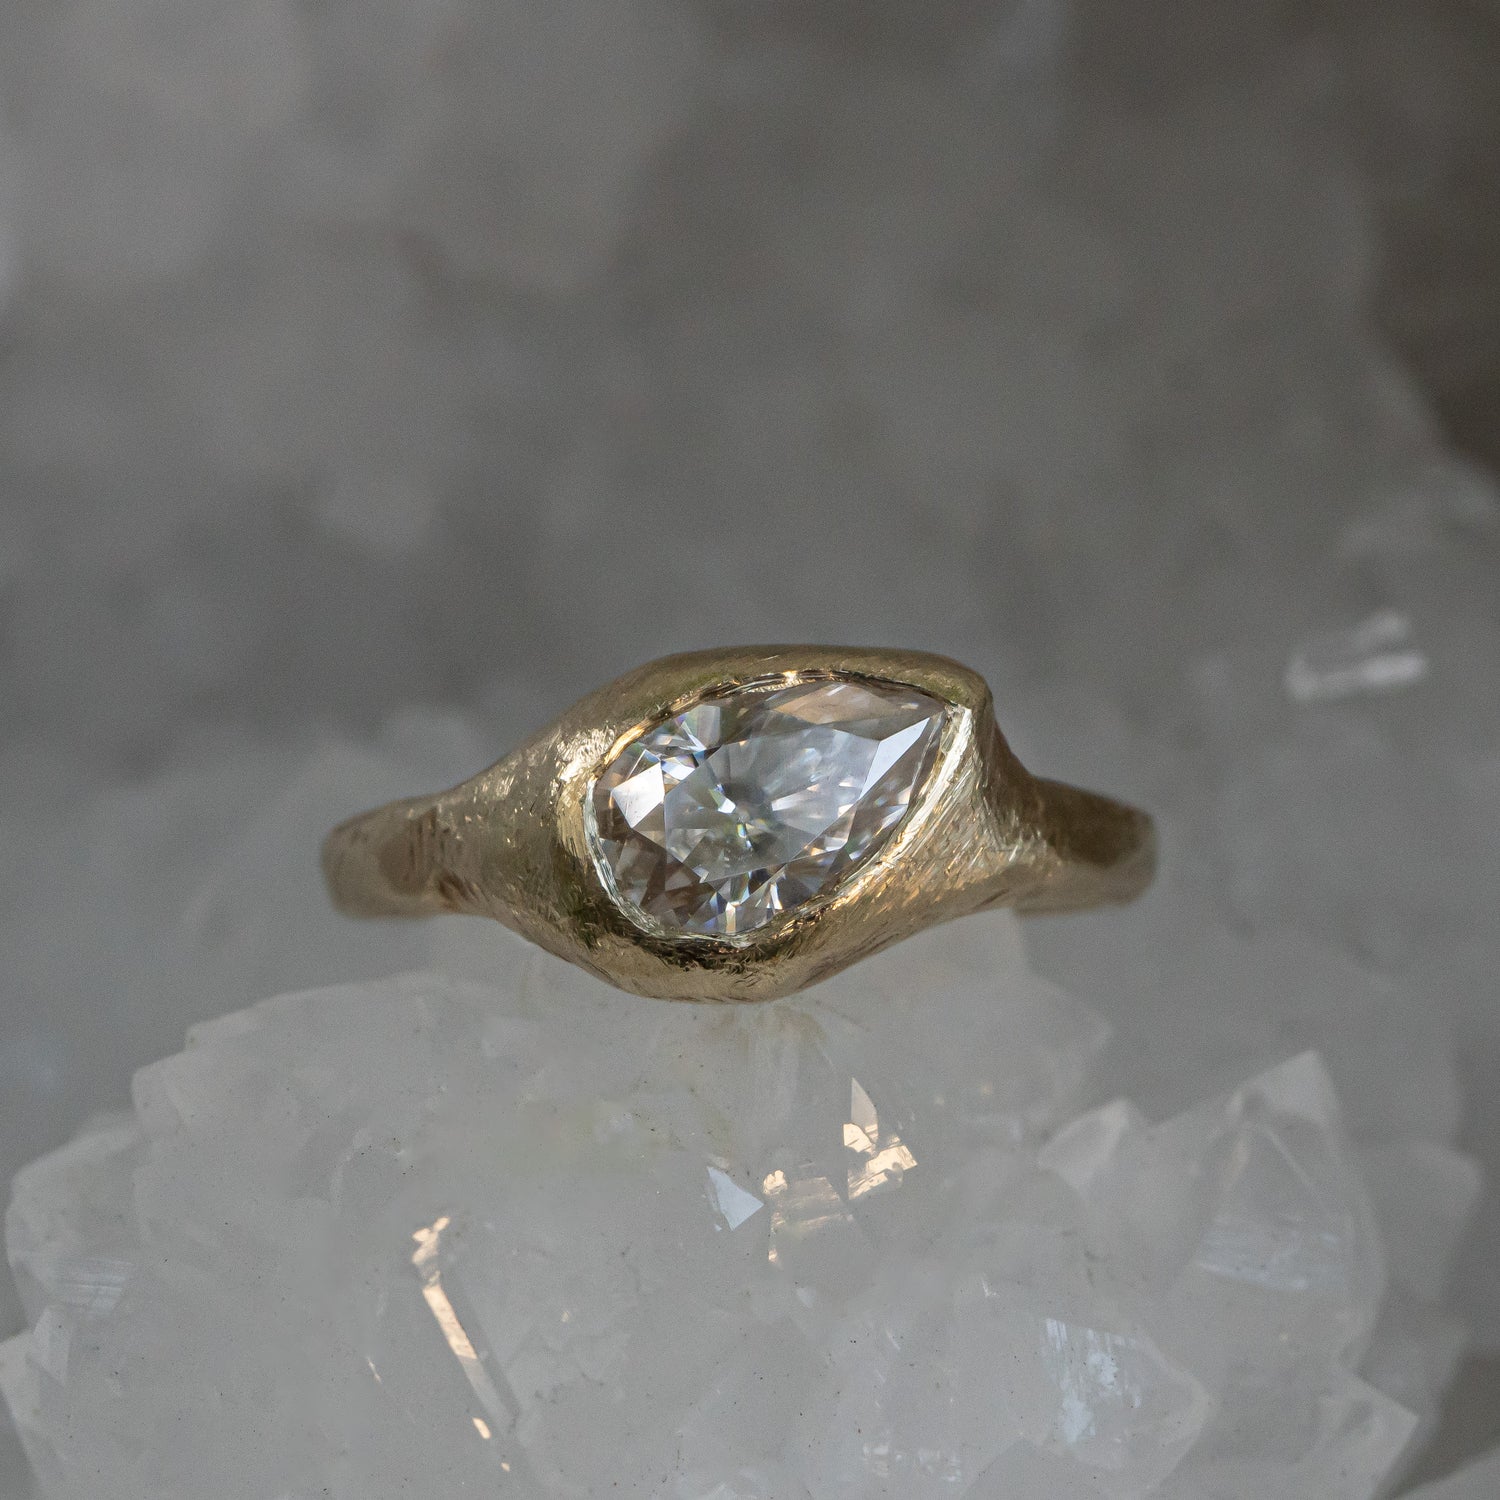 Slanted Pear, Signent Style Diamond Engagement Ring - Salt and Pepper Diamond Ring- mossNstone